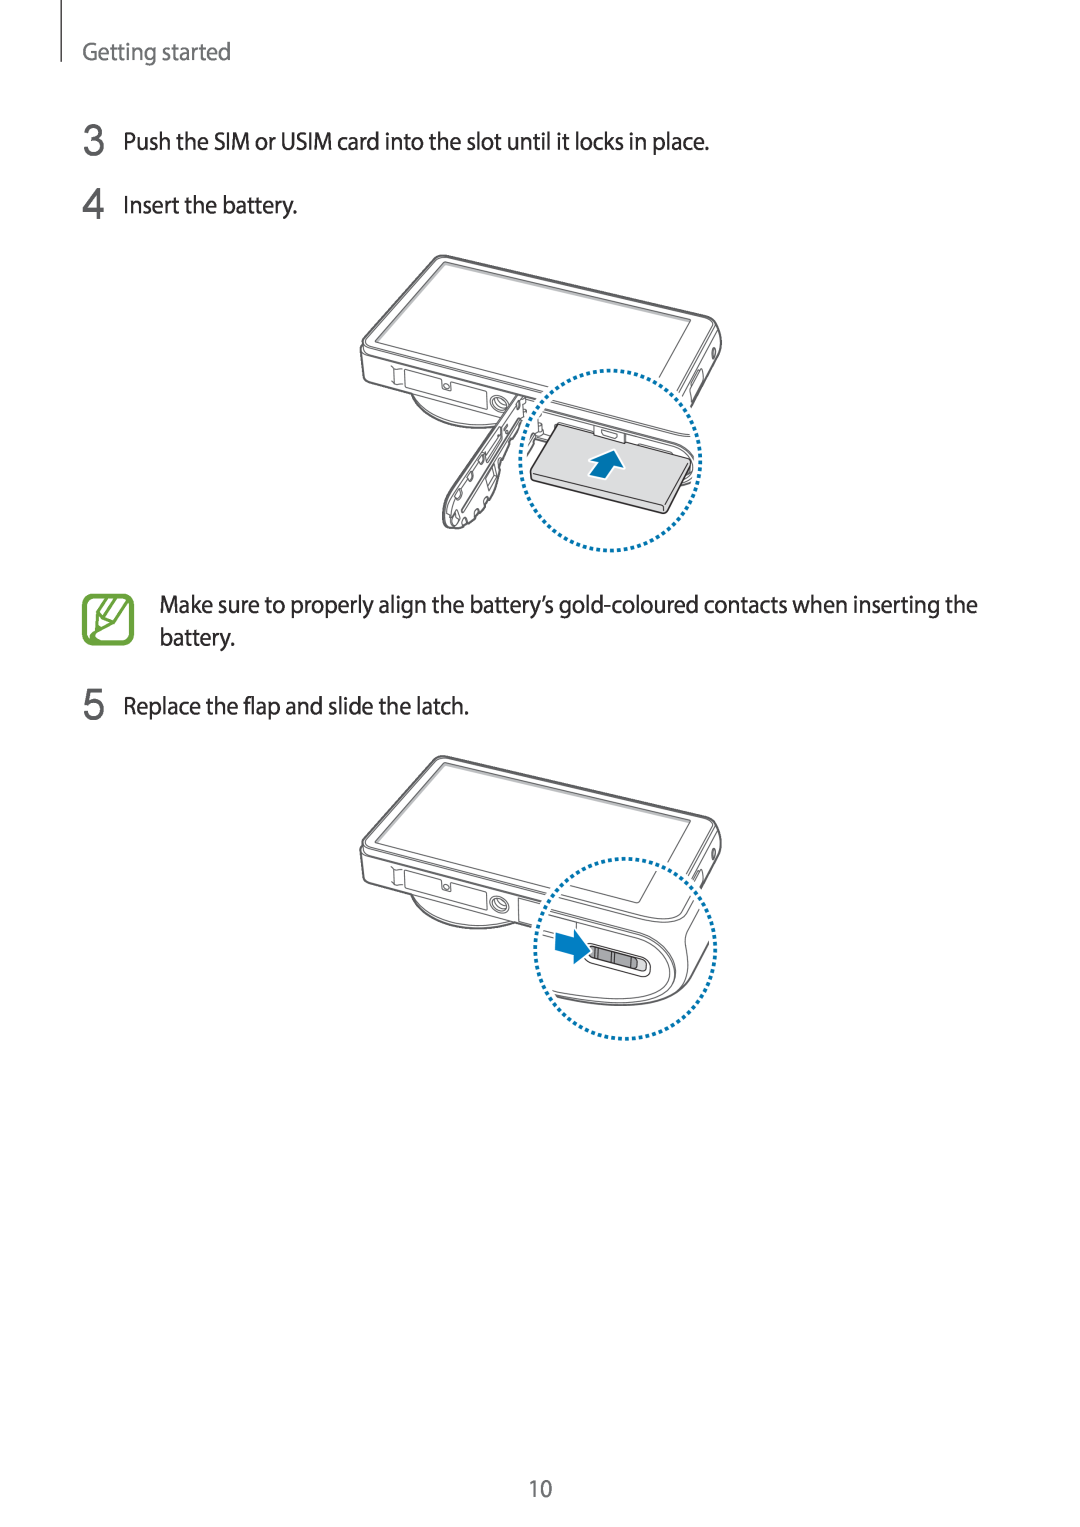 Samsung EK-GC100 Getting started, Push the SIM or USIM card into the slot until it locks in place, Insert the battery 